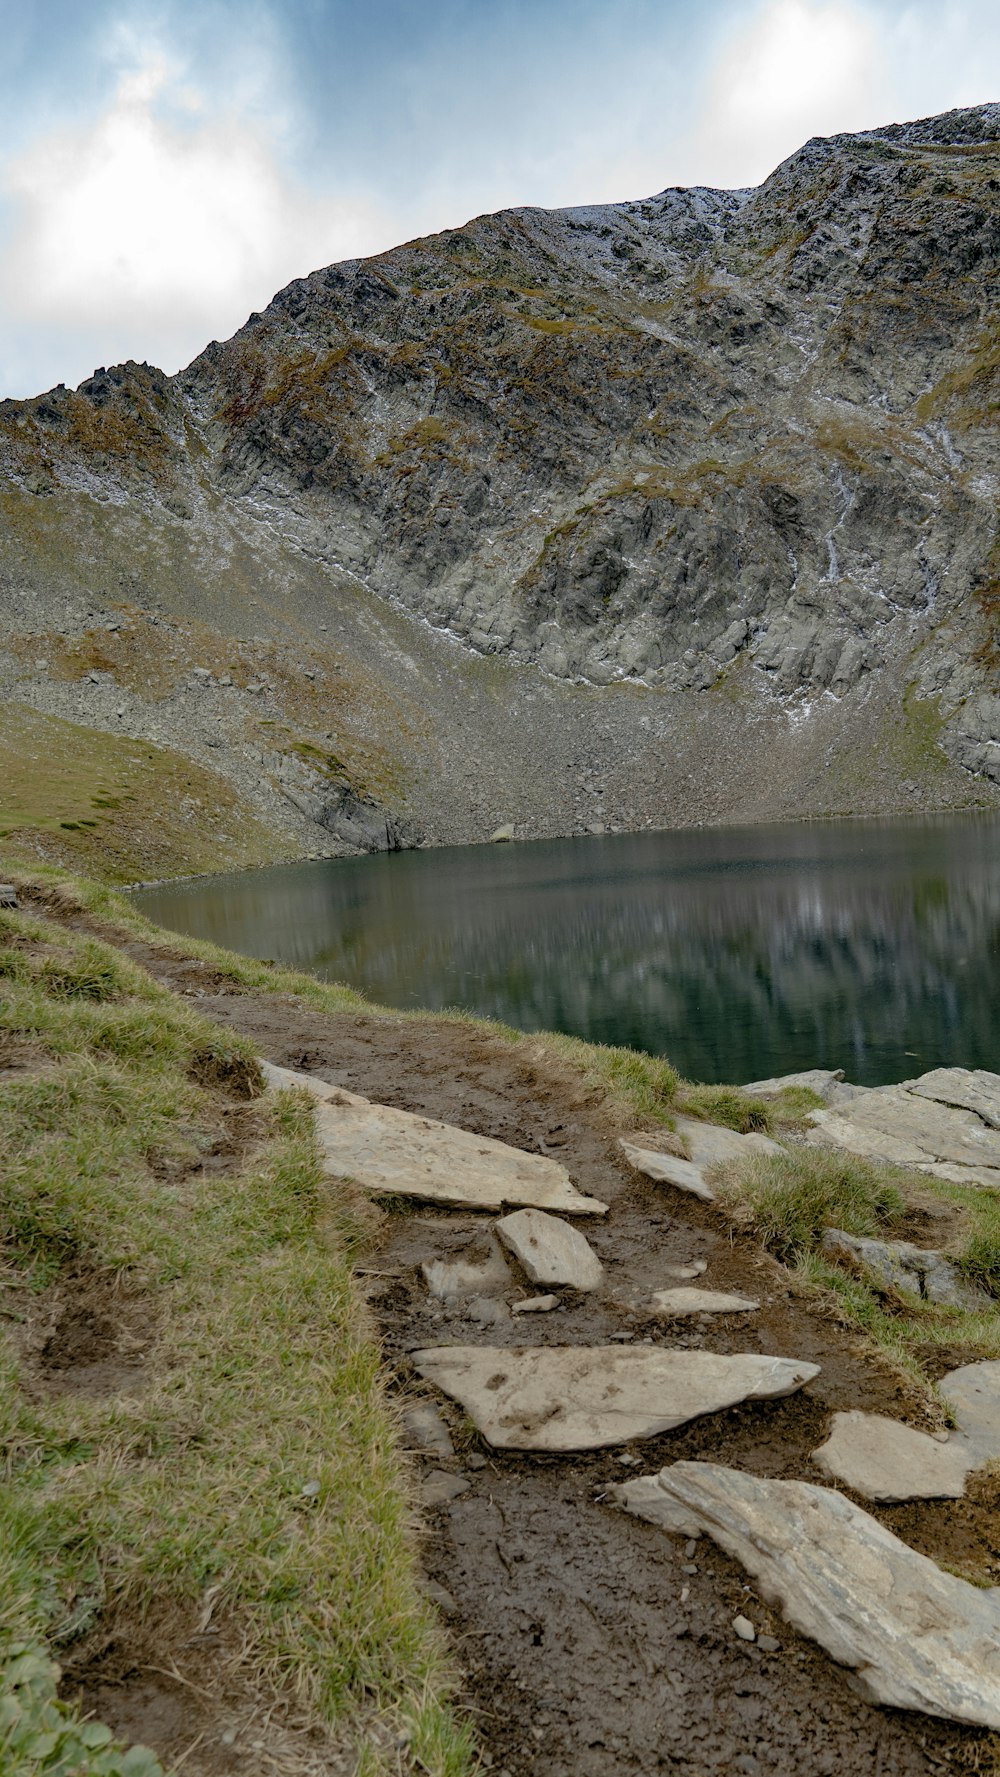 a lake in a rocky area